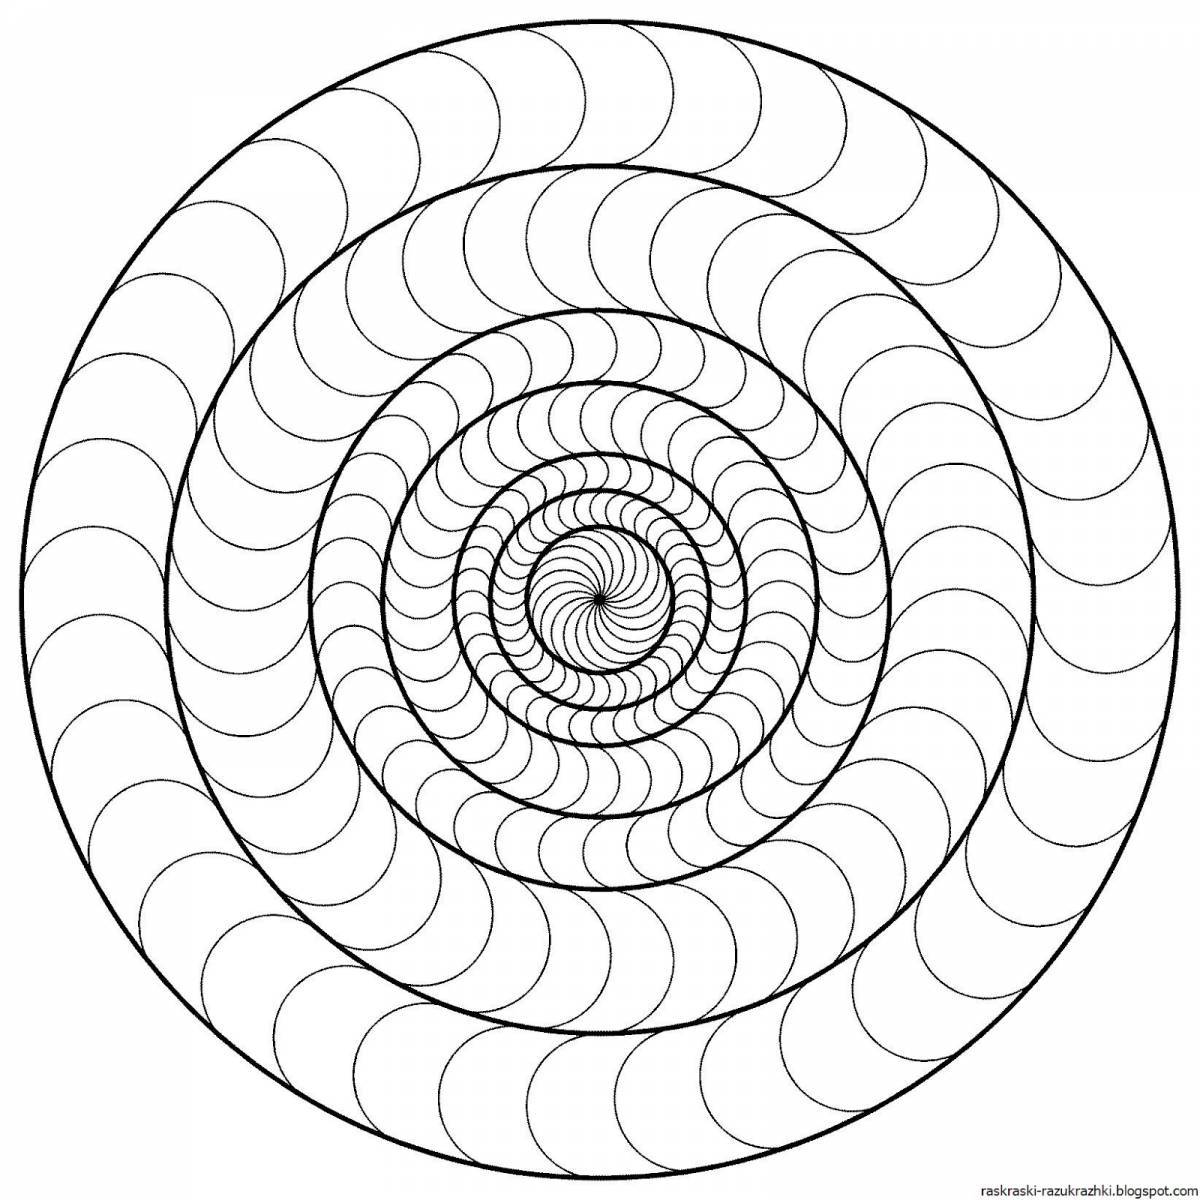 Fascinating betty spiral coloring page